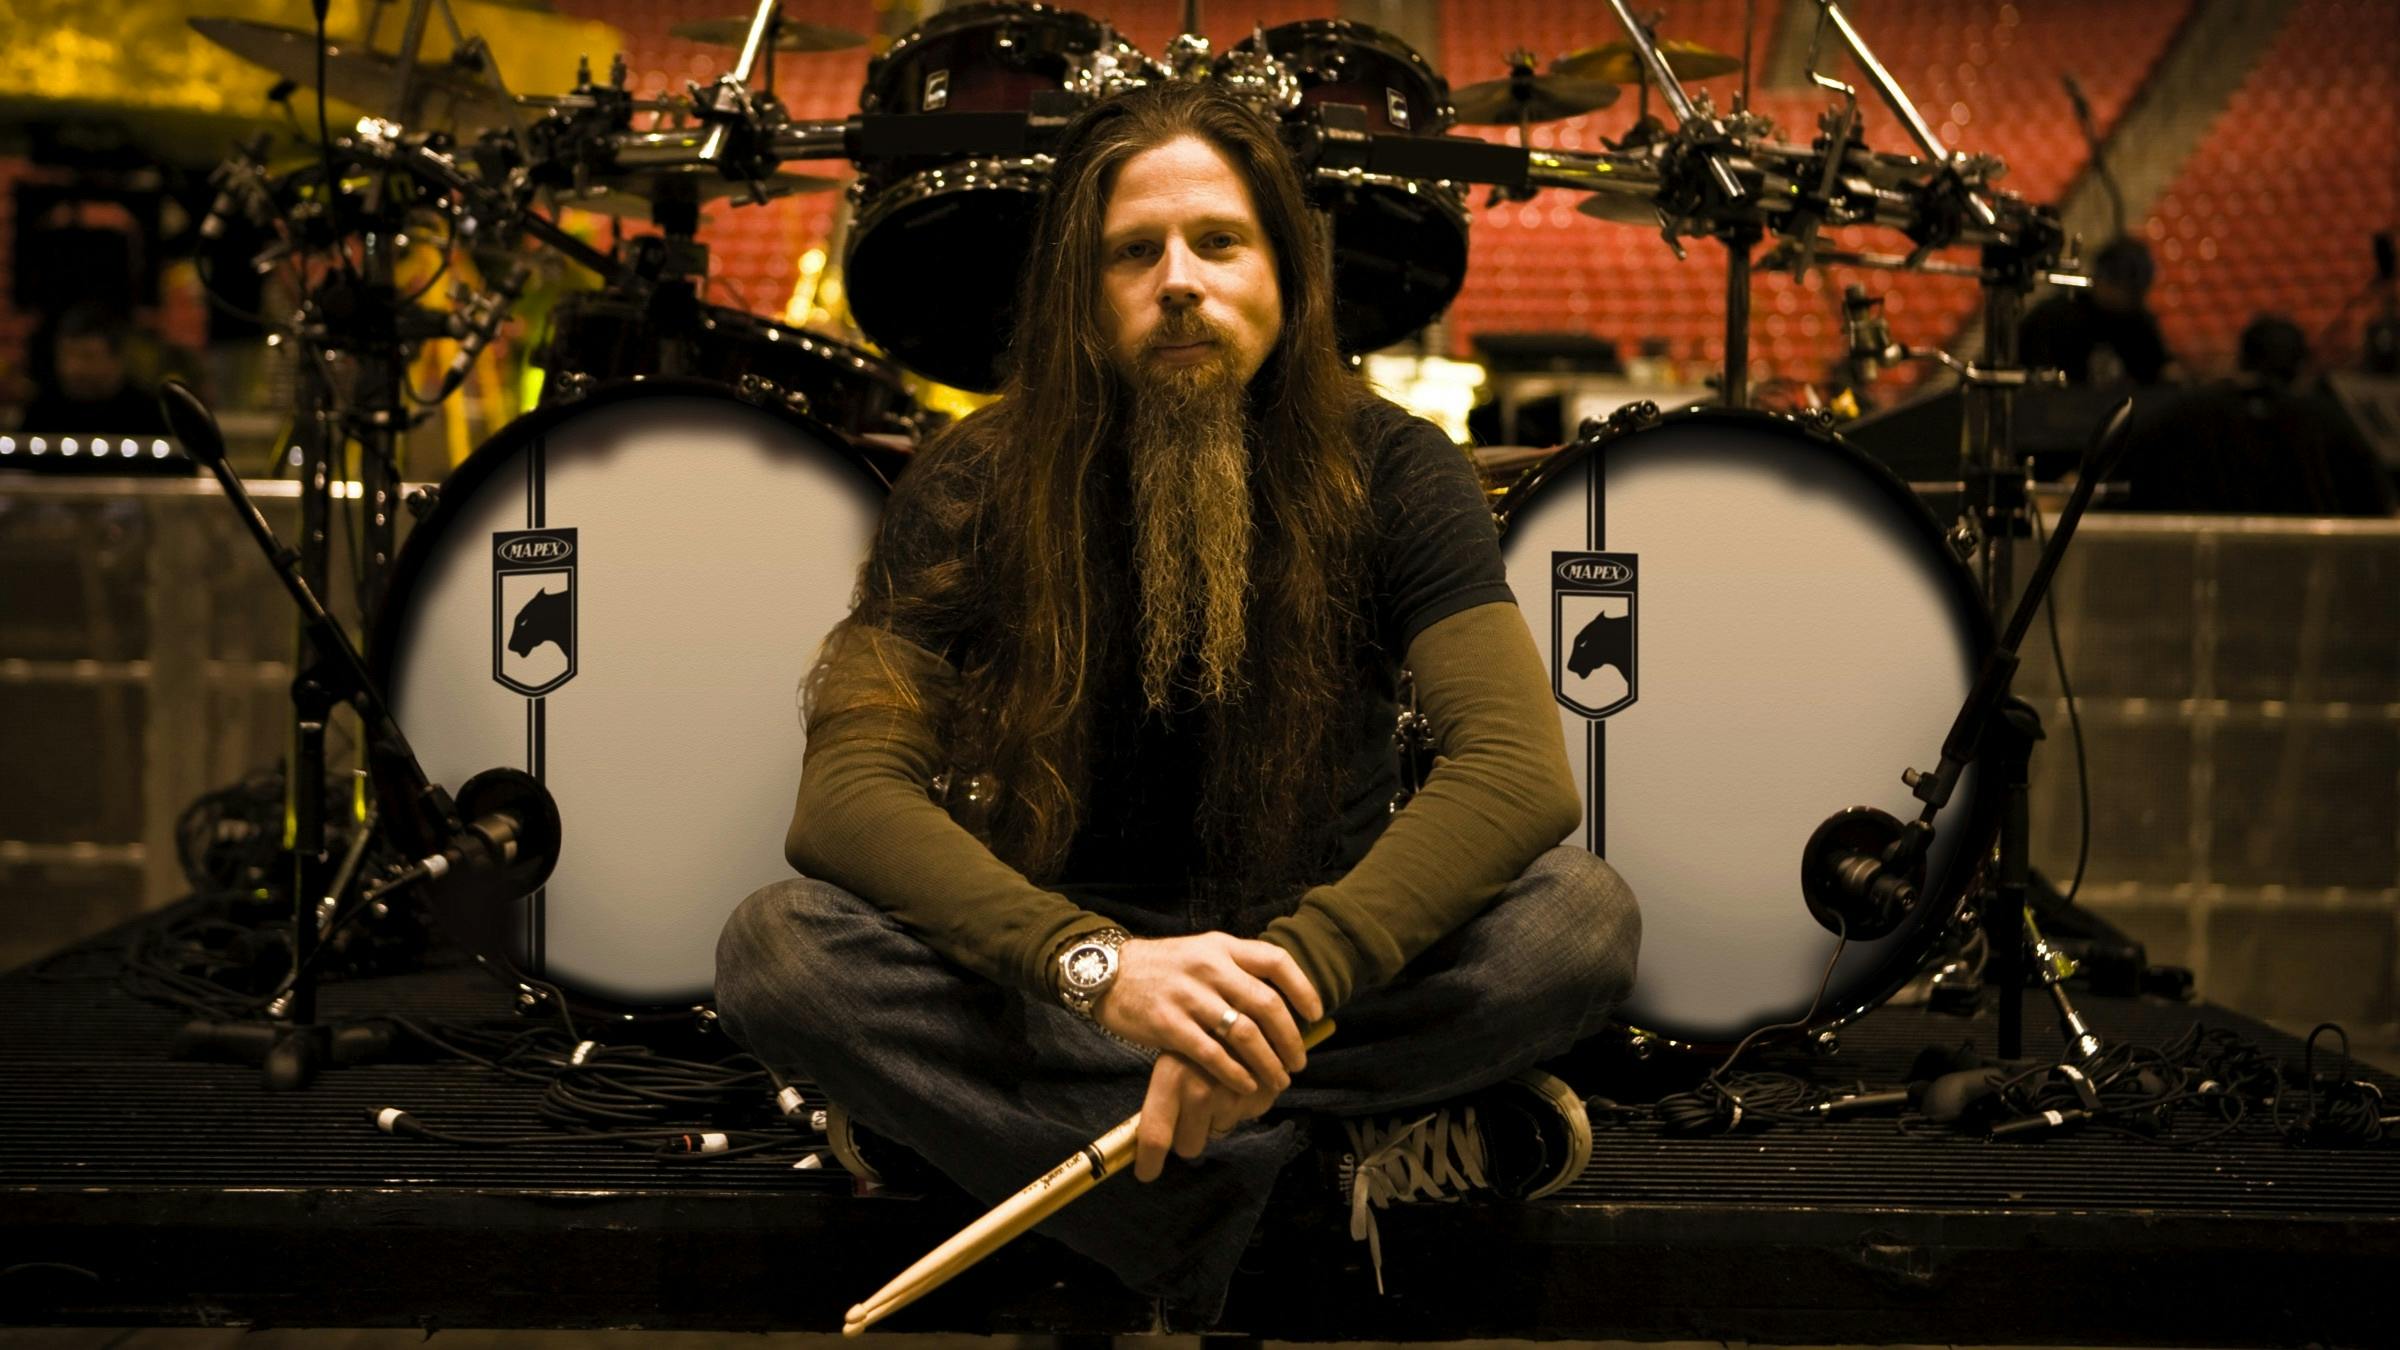 Watch Lamb Of God's Last Show With Drummer Chris Adler